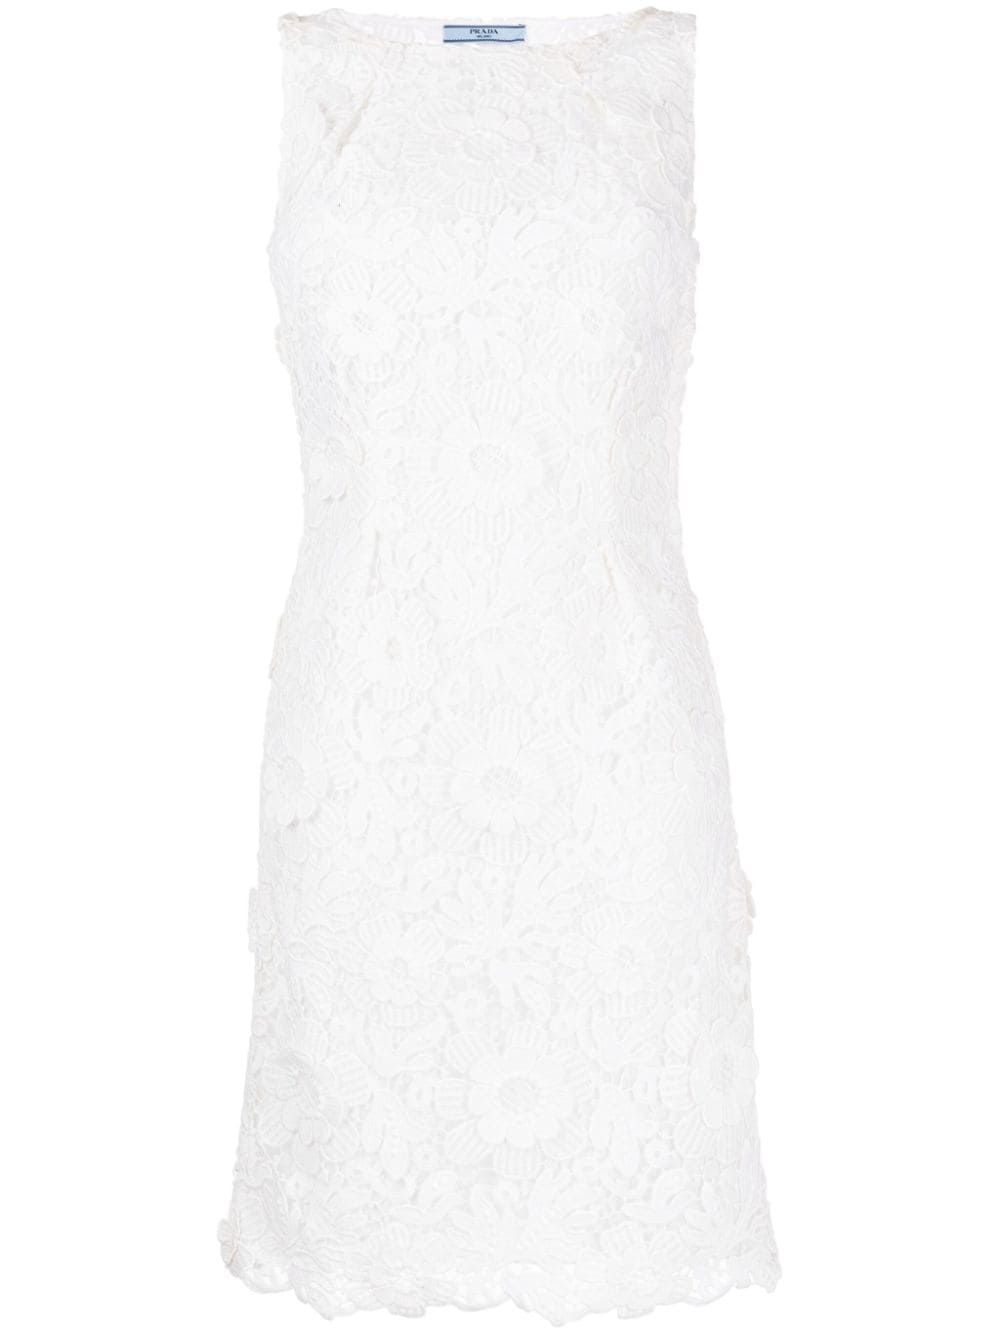 Prada Pre-Owned floral broderie anglaise dress - White